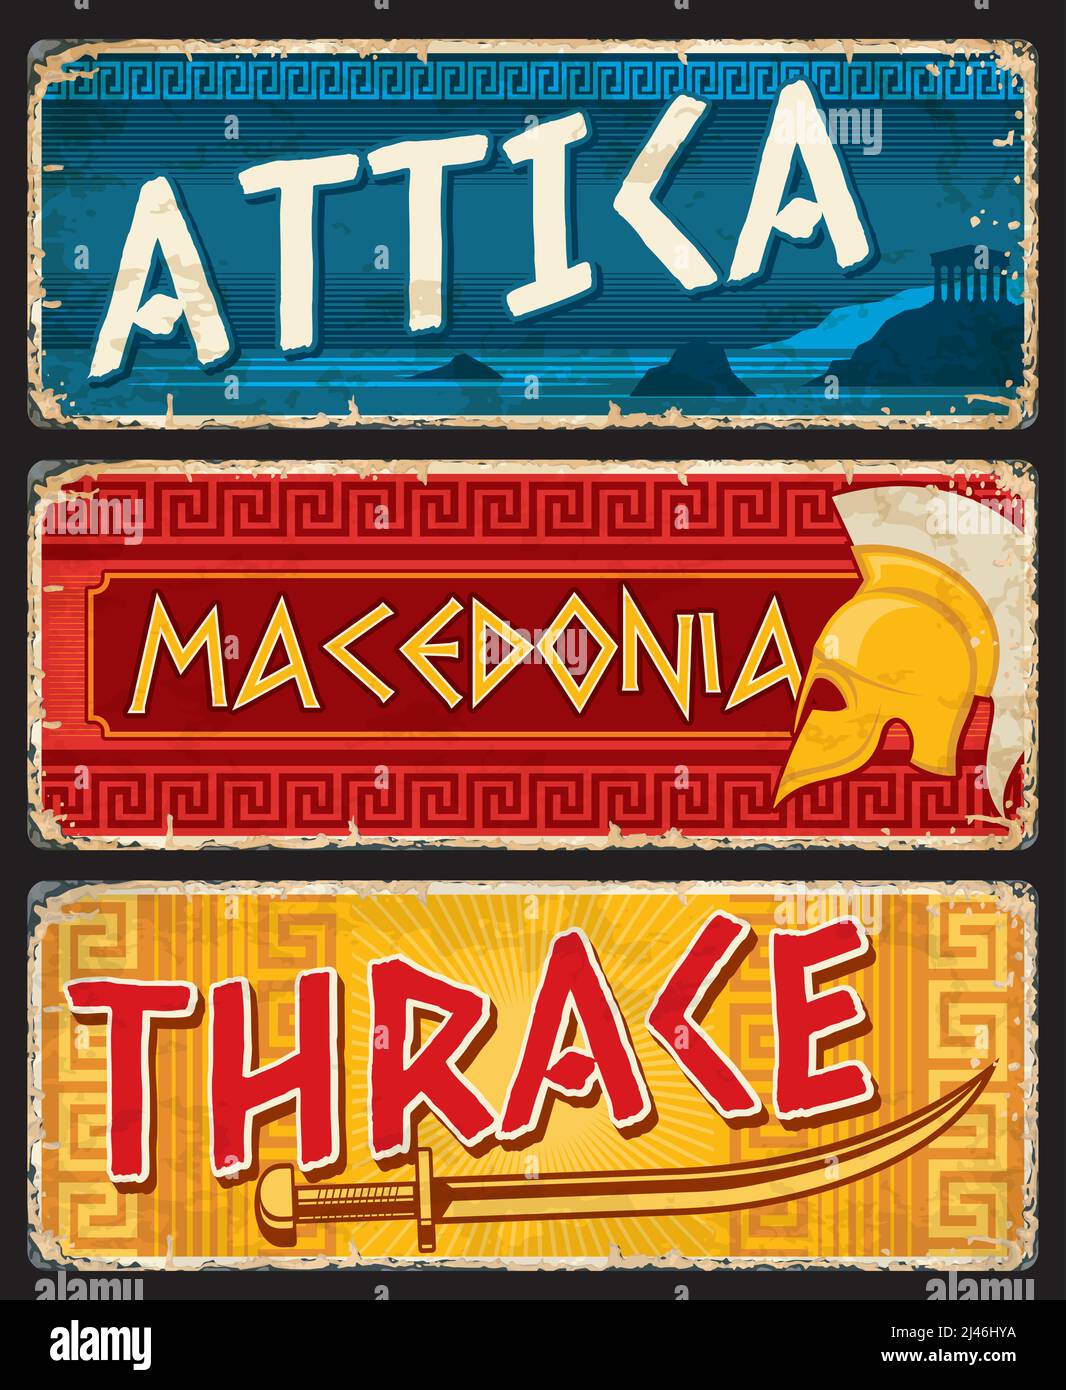 Attica, Macedonia and Thrace greek regions plates. Greece regions grunge vector plate, vintage tin sign with shabby sides, typography and macedonian helmet, Thracian ancient Sica sword weapon Stock Vector